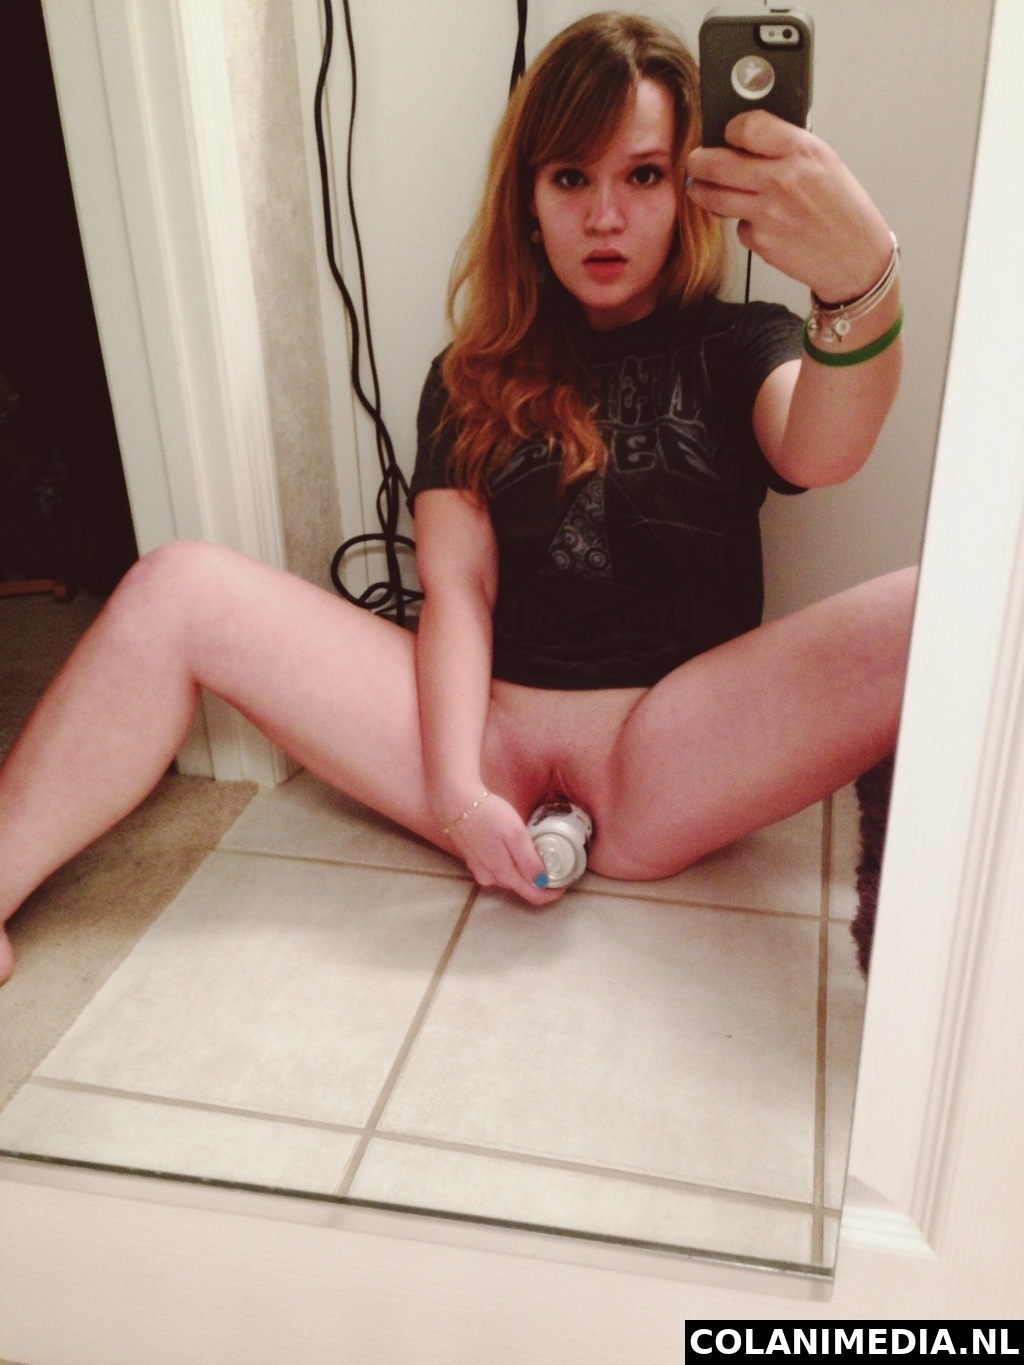 SELFIE TEEN MASTURBATING HER PUSSY WITH BEER CAN